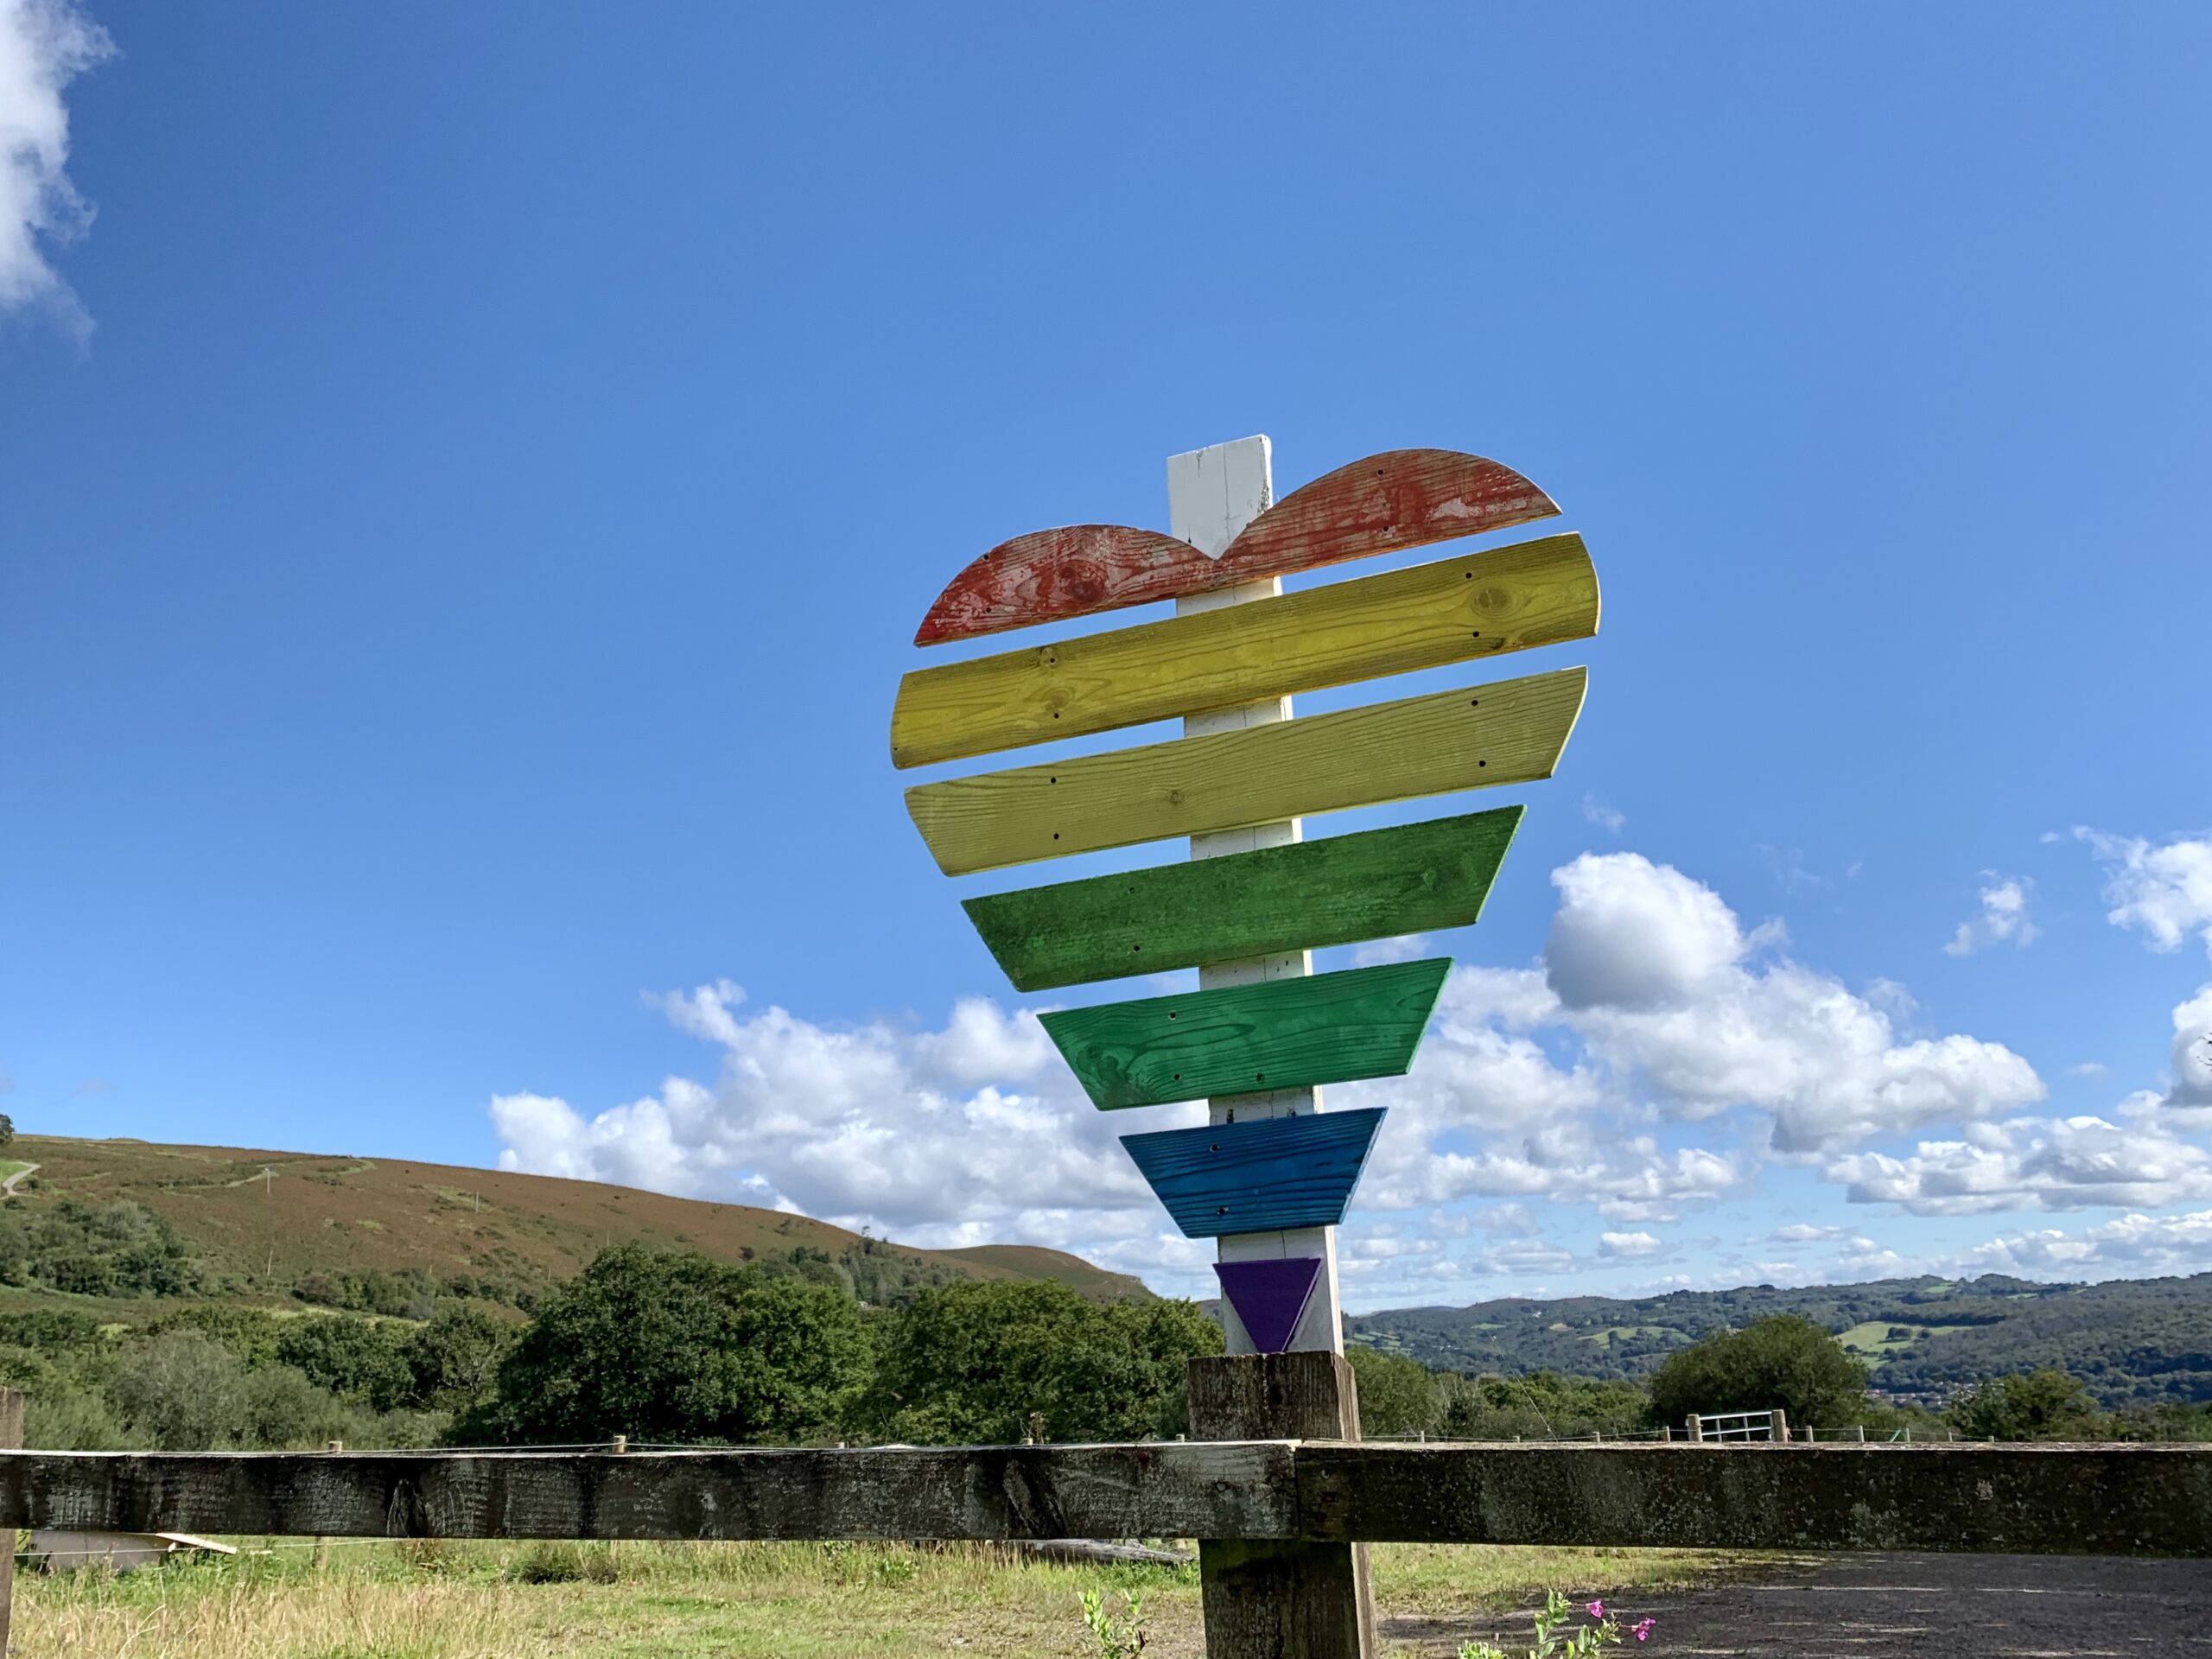 The image shows a landscape with blue sky and a heart-shaped wooden sign in rainbow colours.